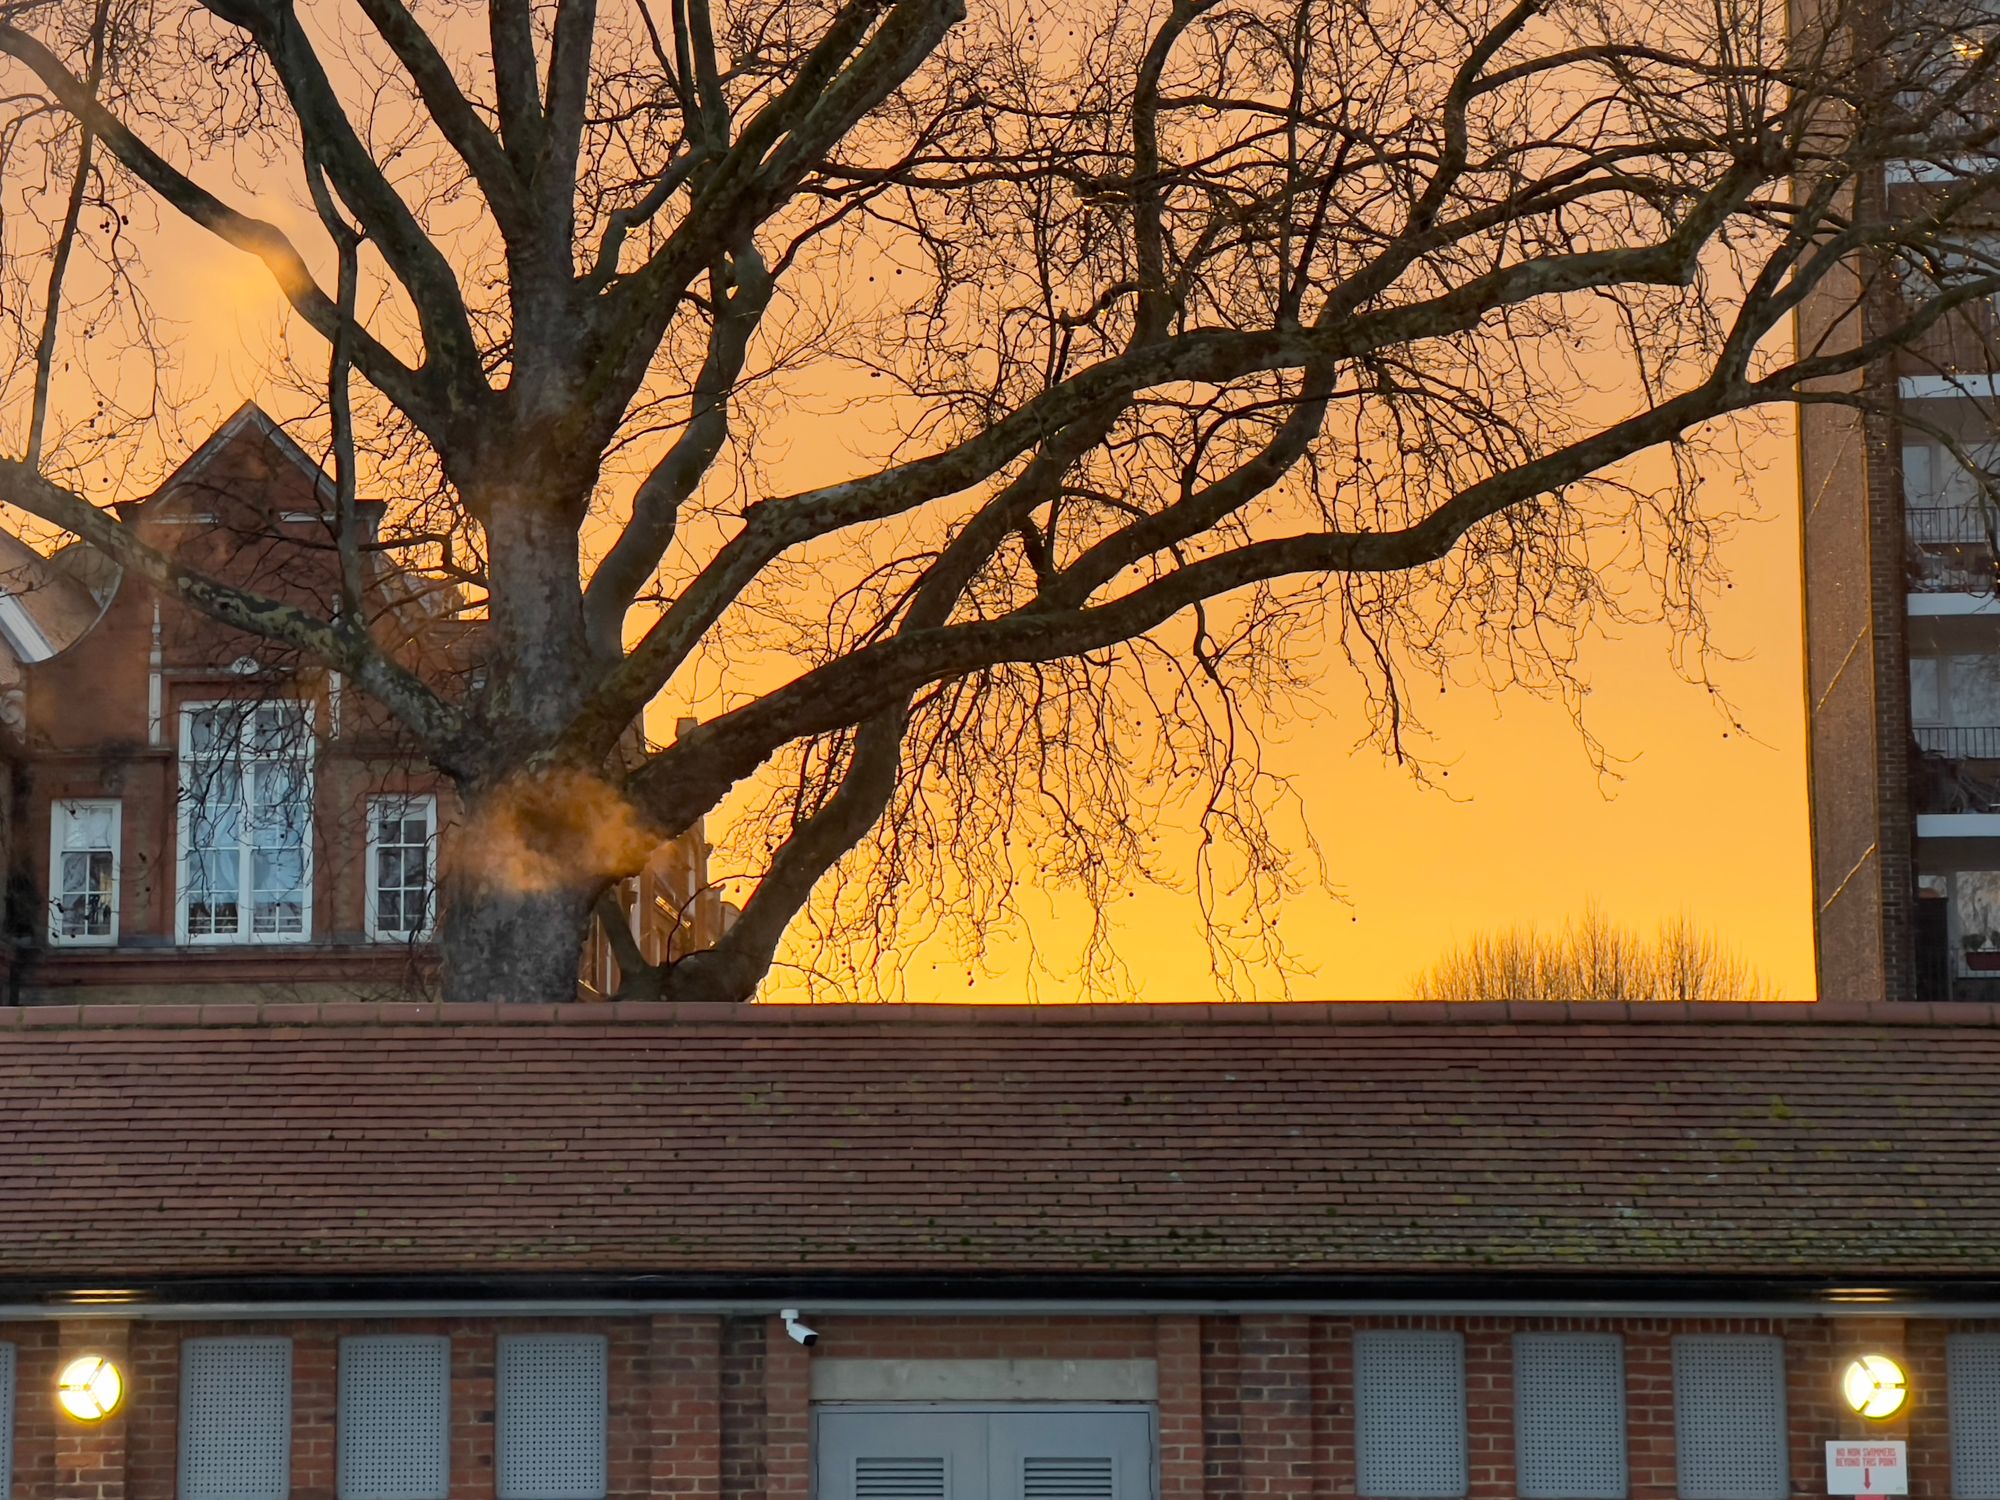 An orange sunset over a building with trees in silhouette, with steam rising from a vent.